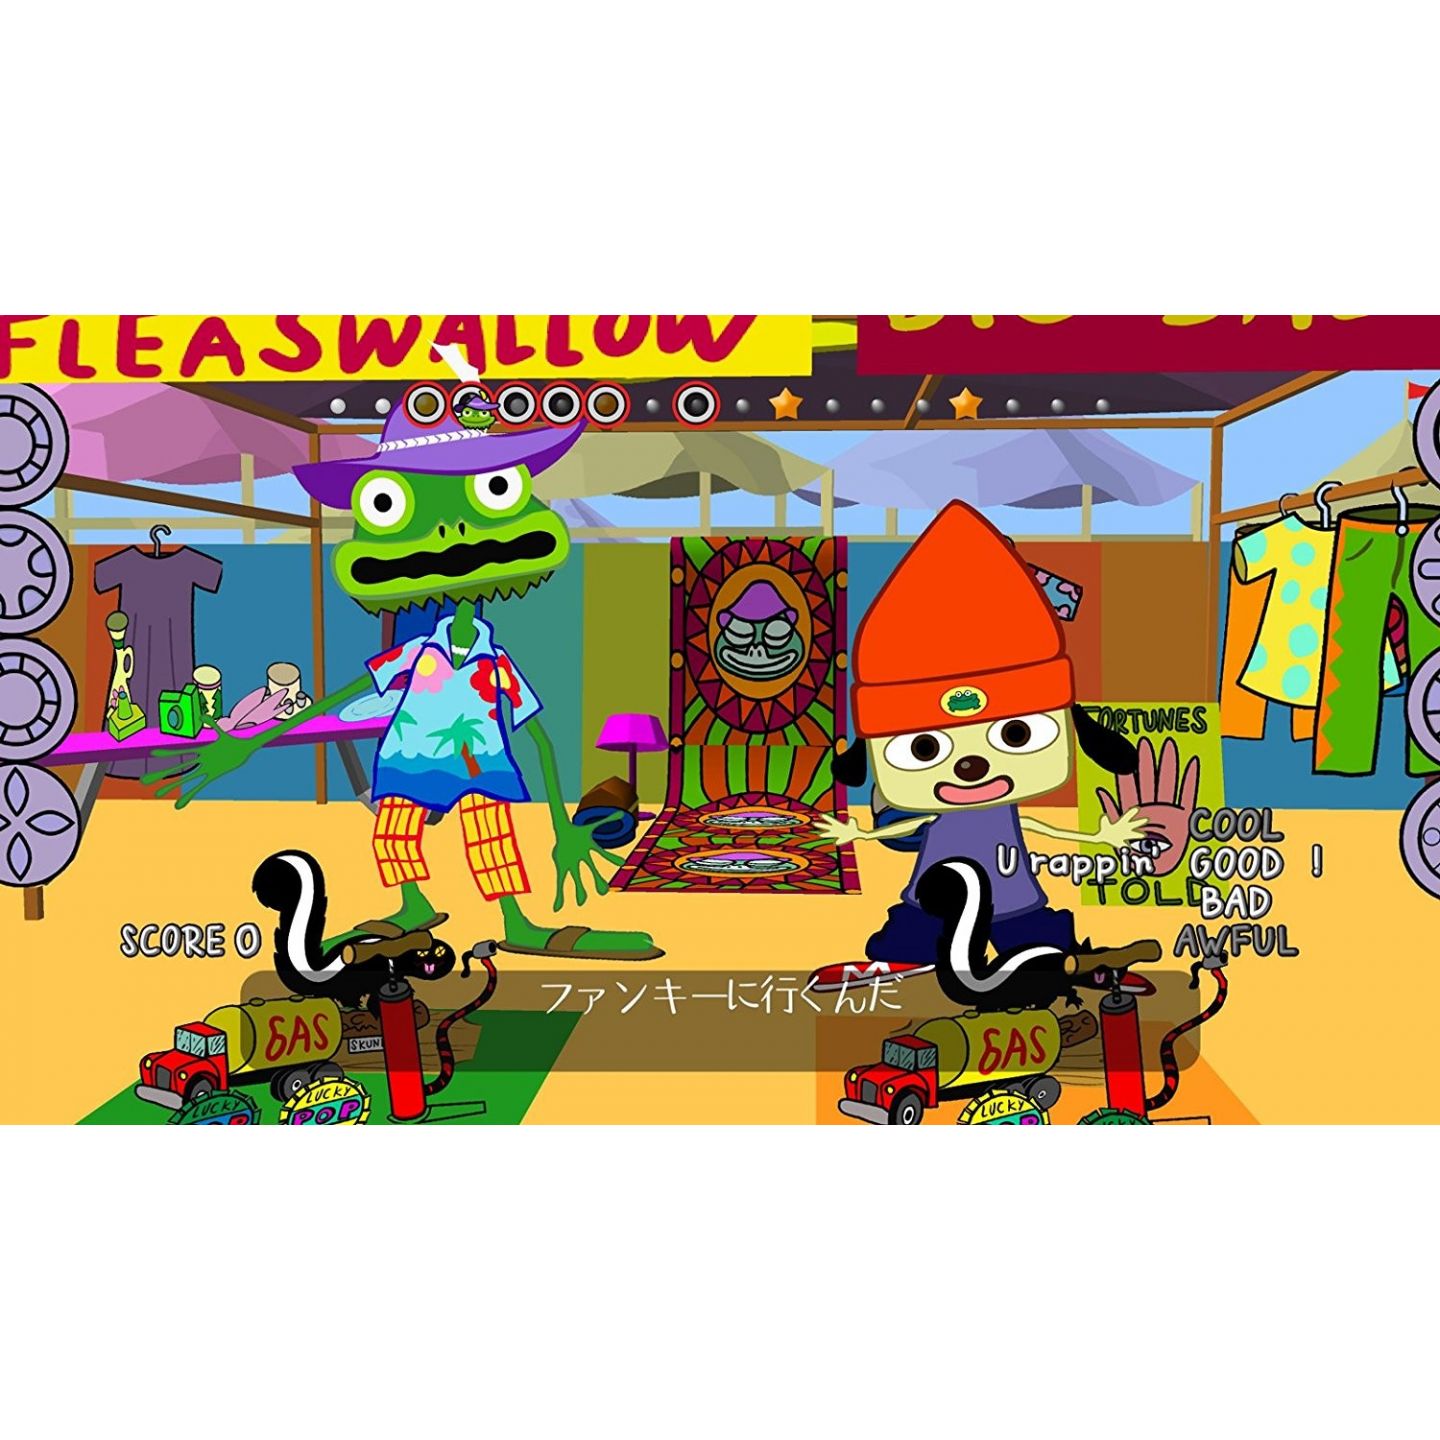  PARAPPA THE RAPPER パラッパラッパー TVアニメーション Stage.2 [DVD] : Movies &  TV